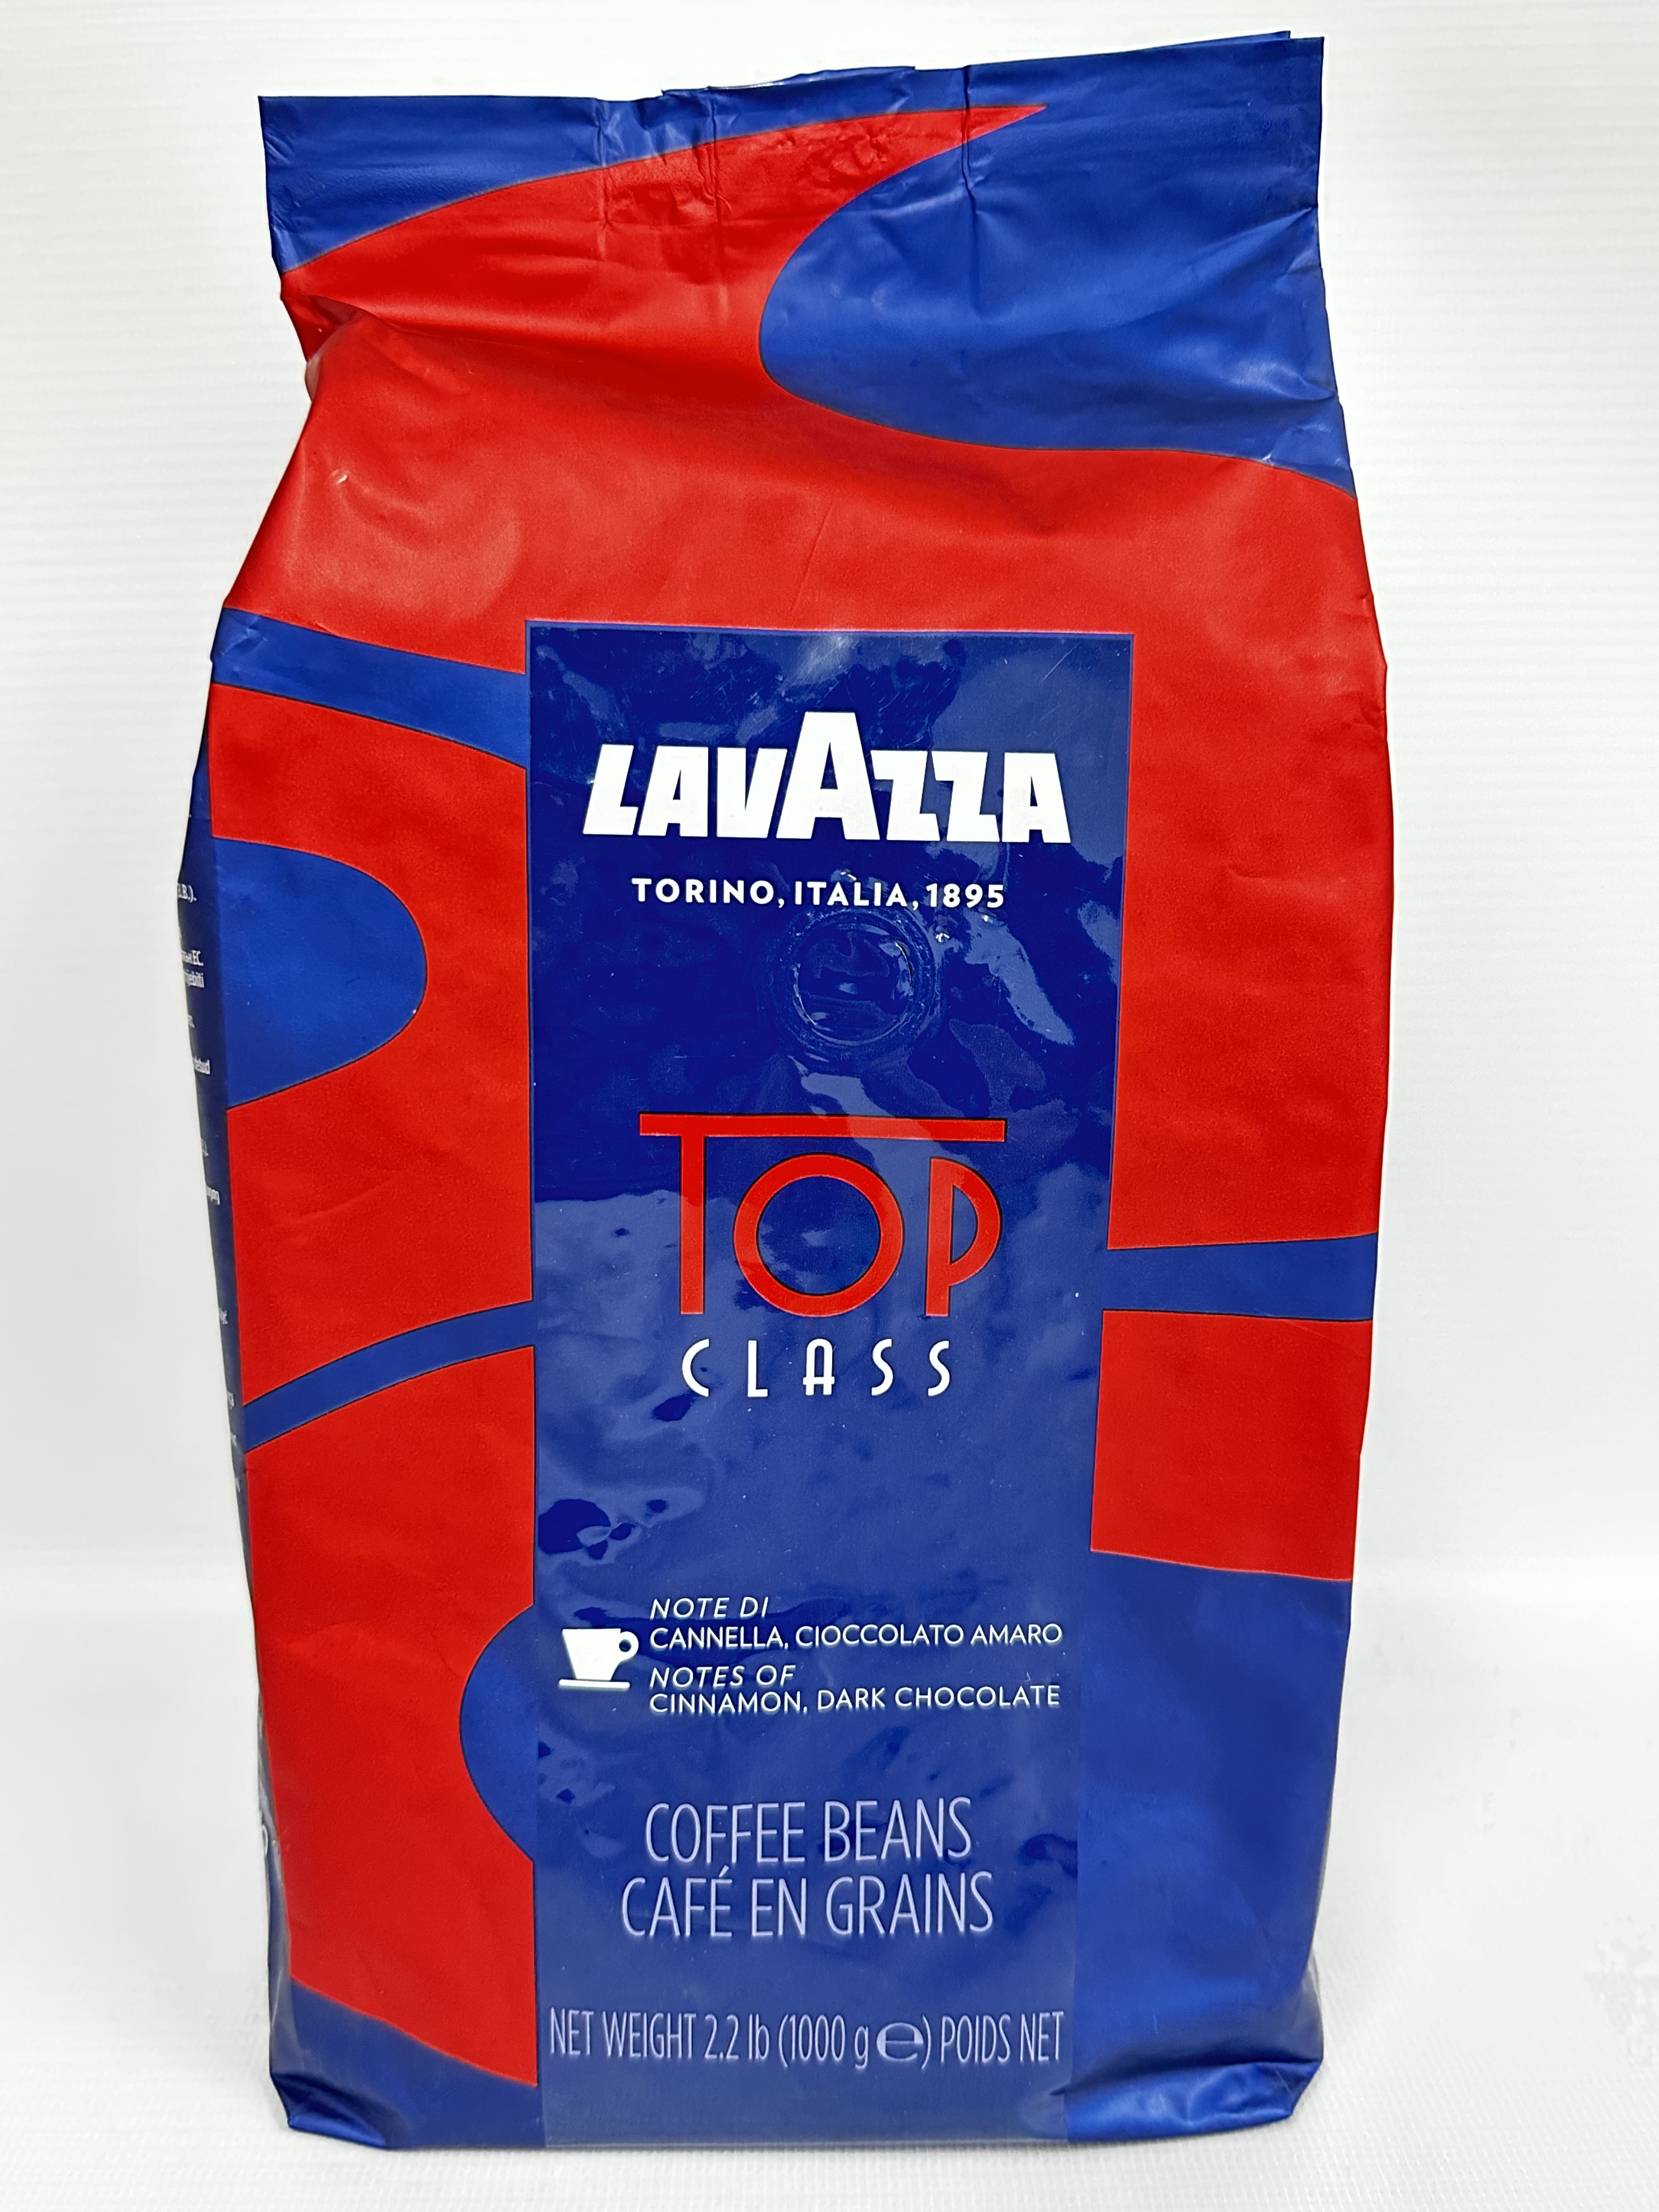 Lavazza Top Class Coffee Beans Bag Notes Of Cinnamon & Dark Chocolate BEST BEFORE DATE 30/04/2023